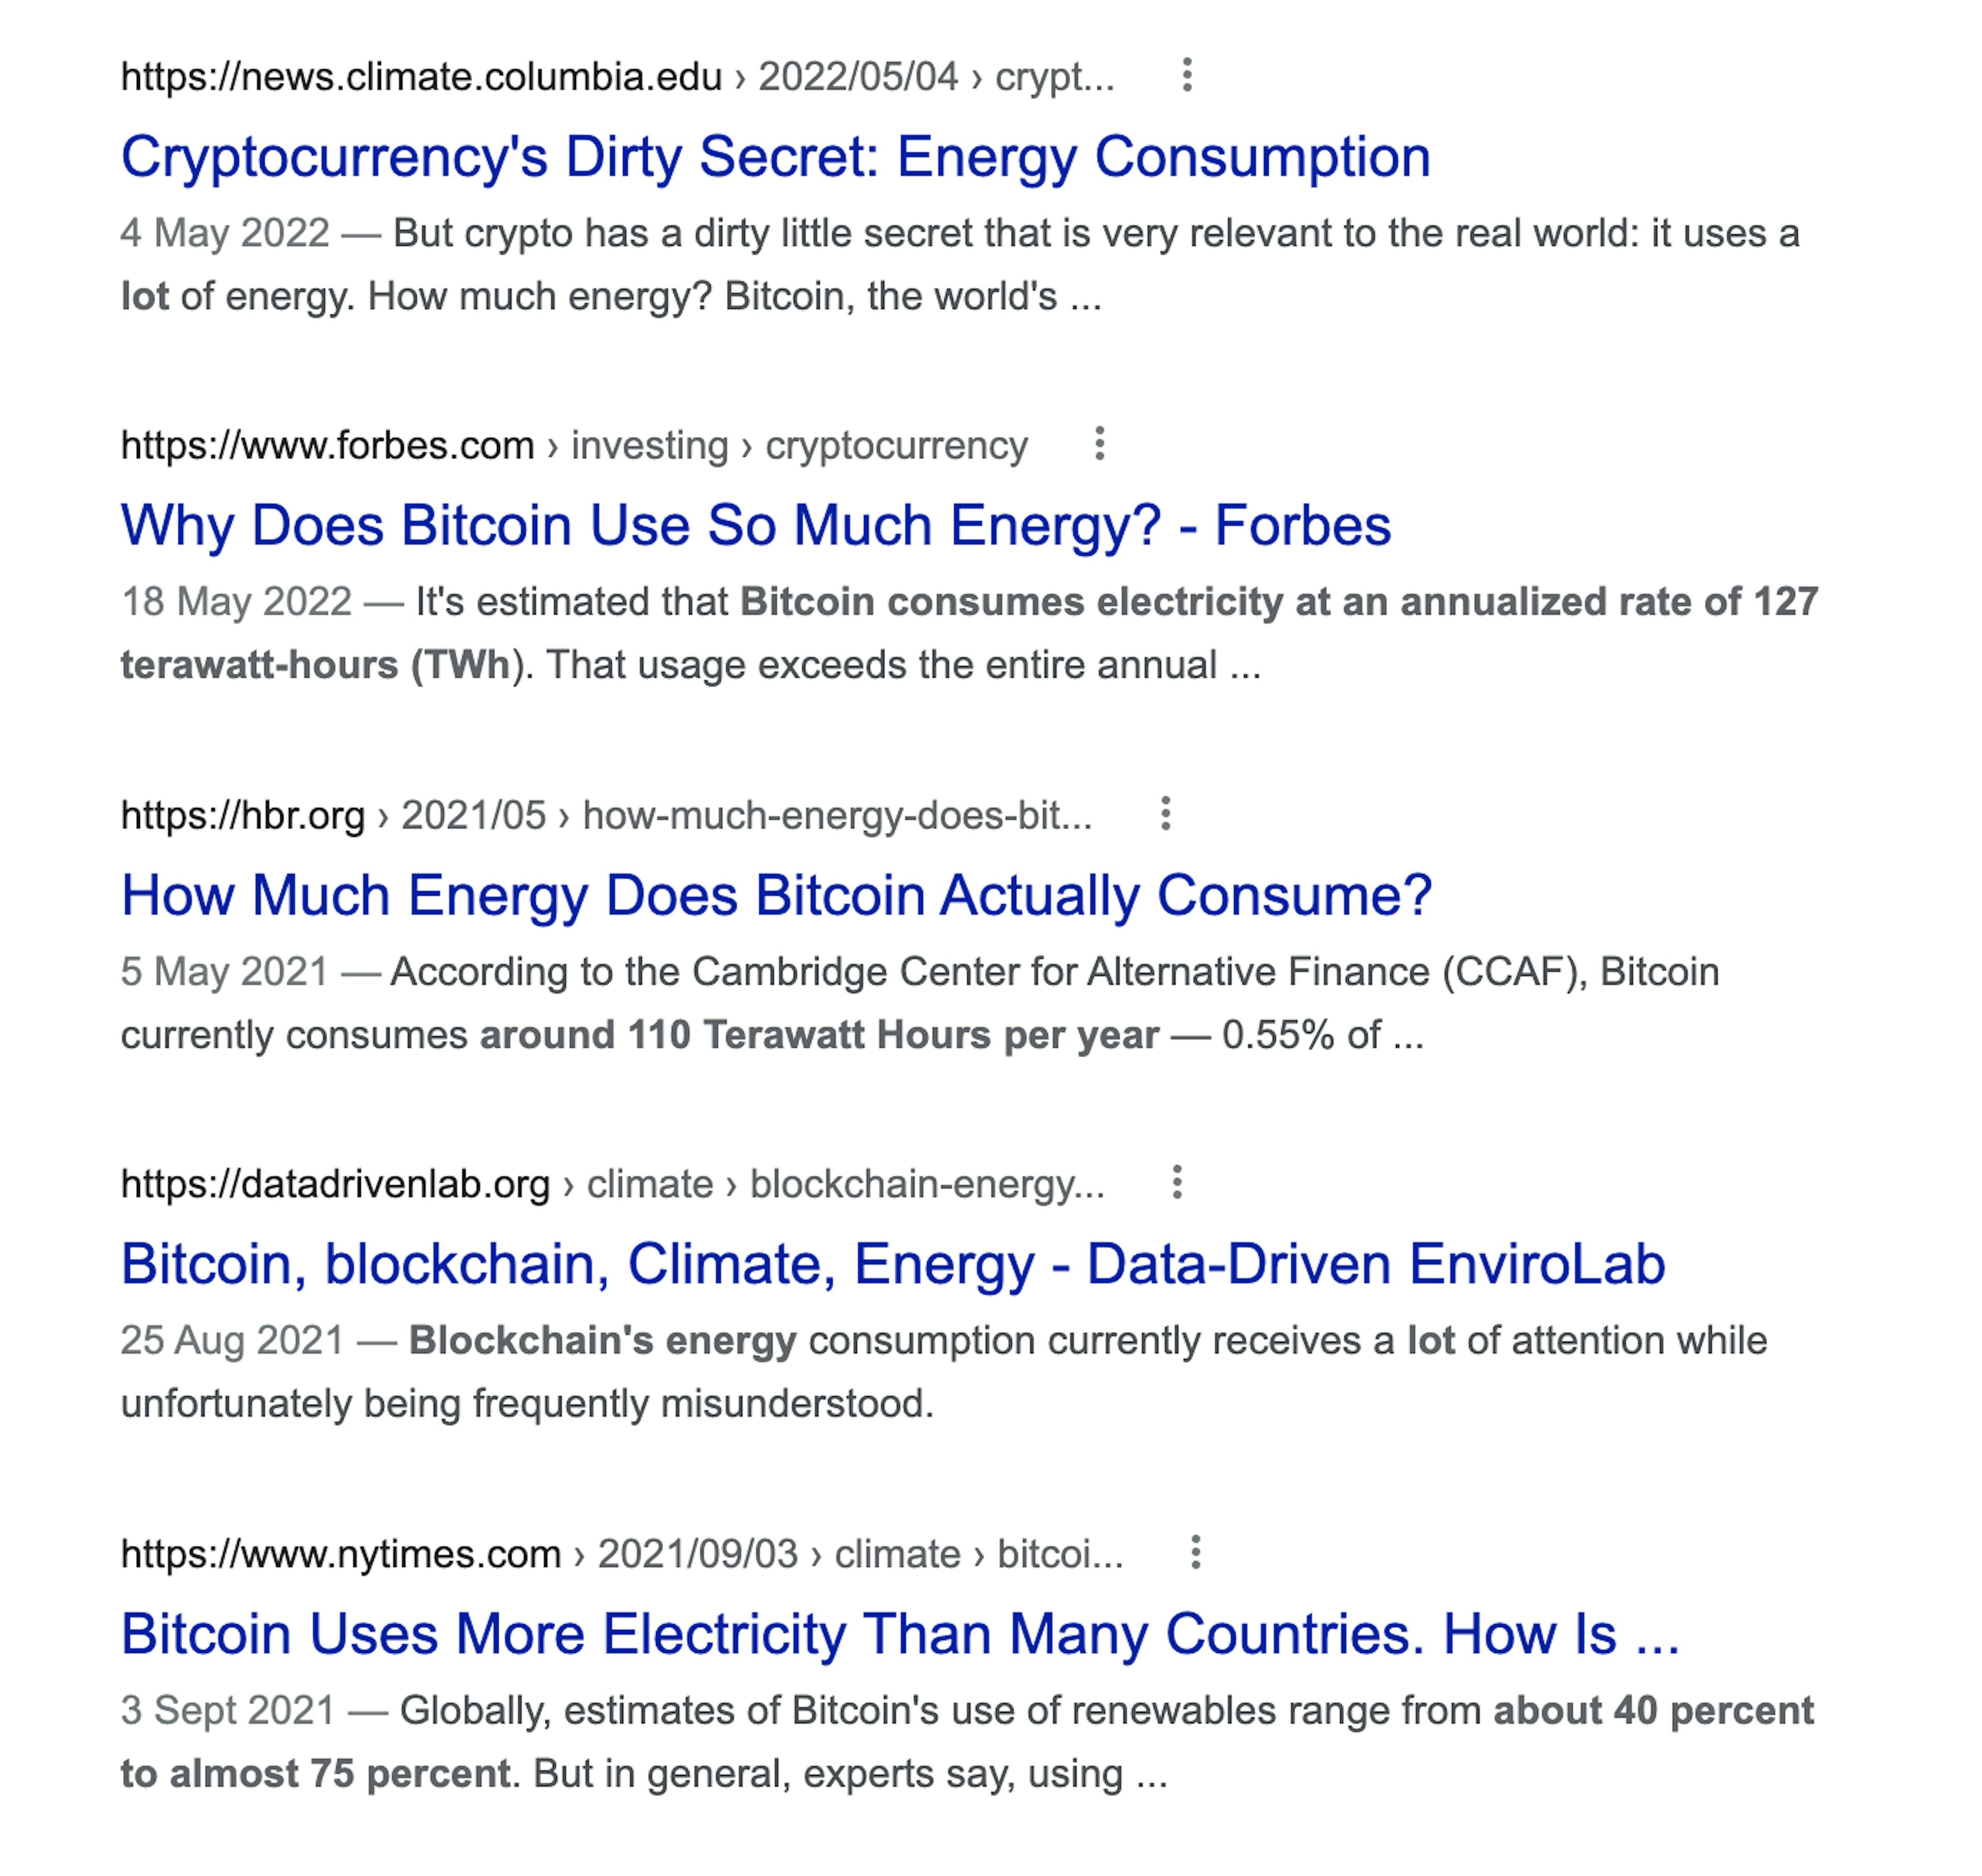 Common news about blockchain energy usage